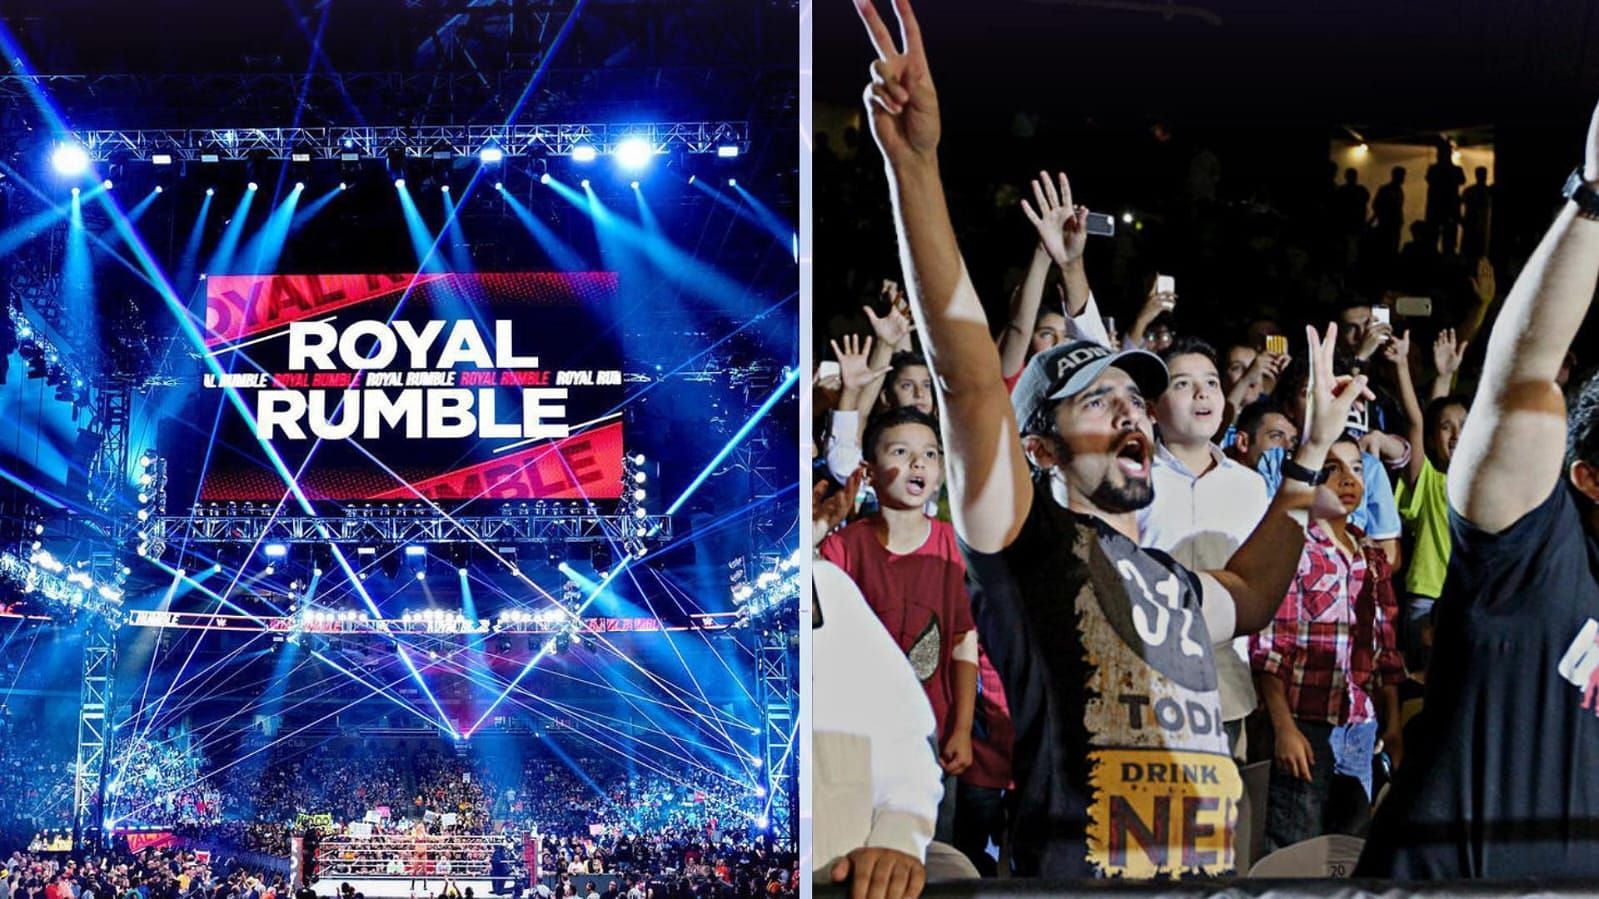 Fans are excited as the Royal Rumble is just around the corner